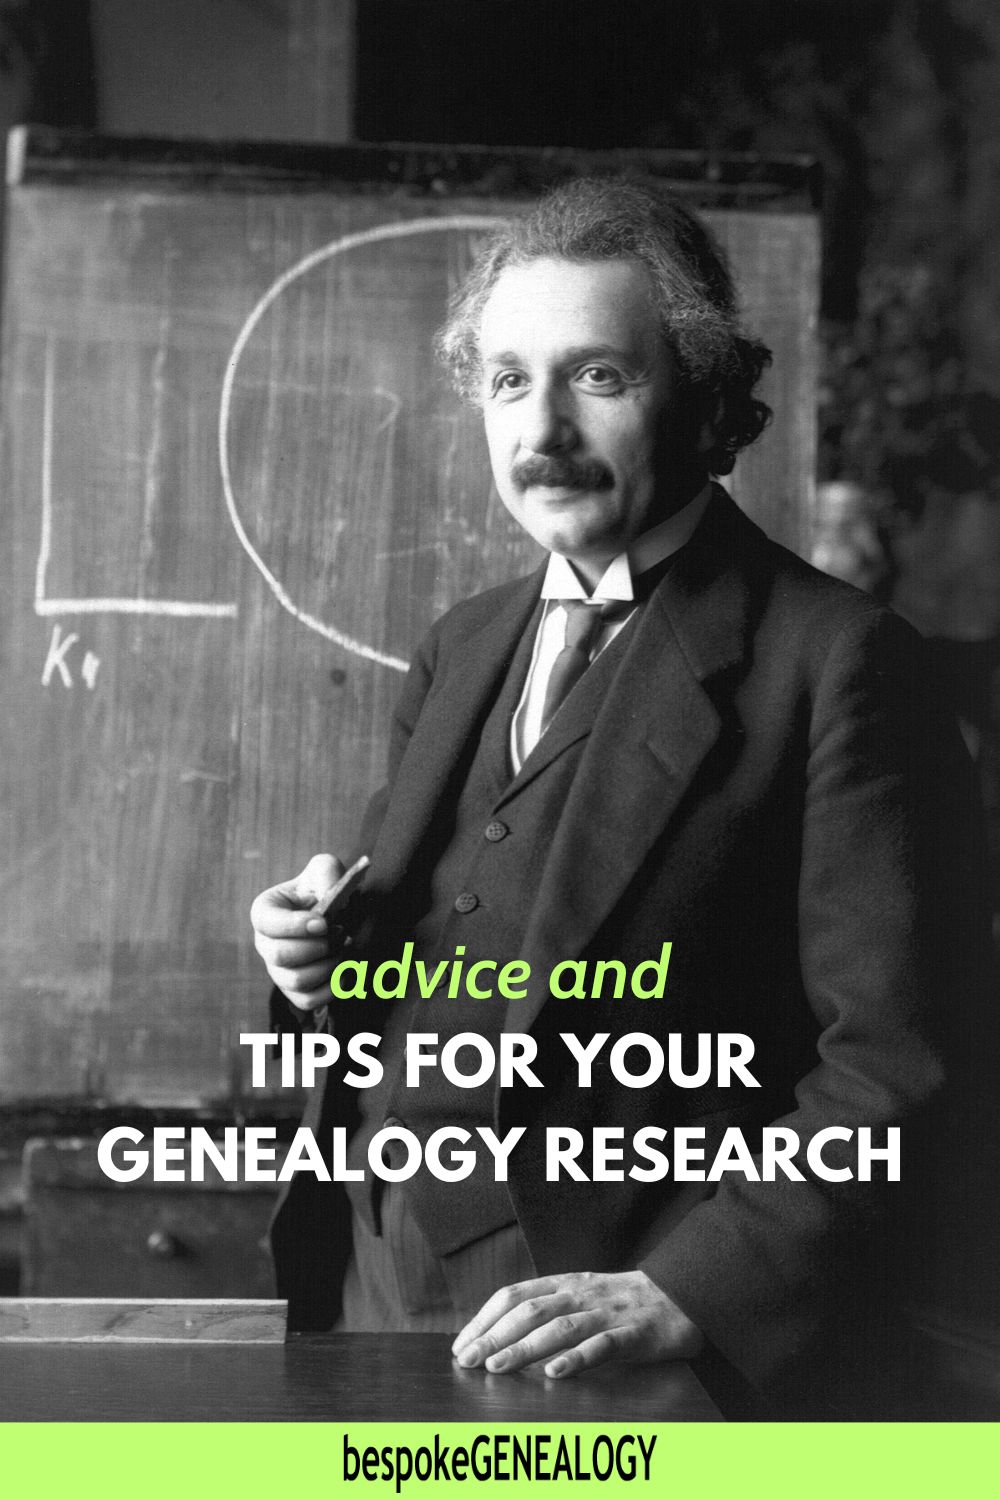 Advice and tips for your genealogy research. Photo of Albert Einstein